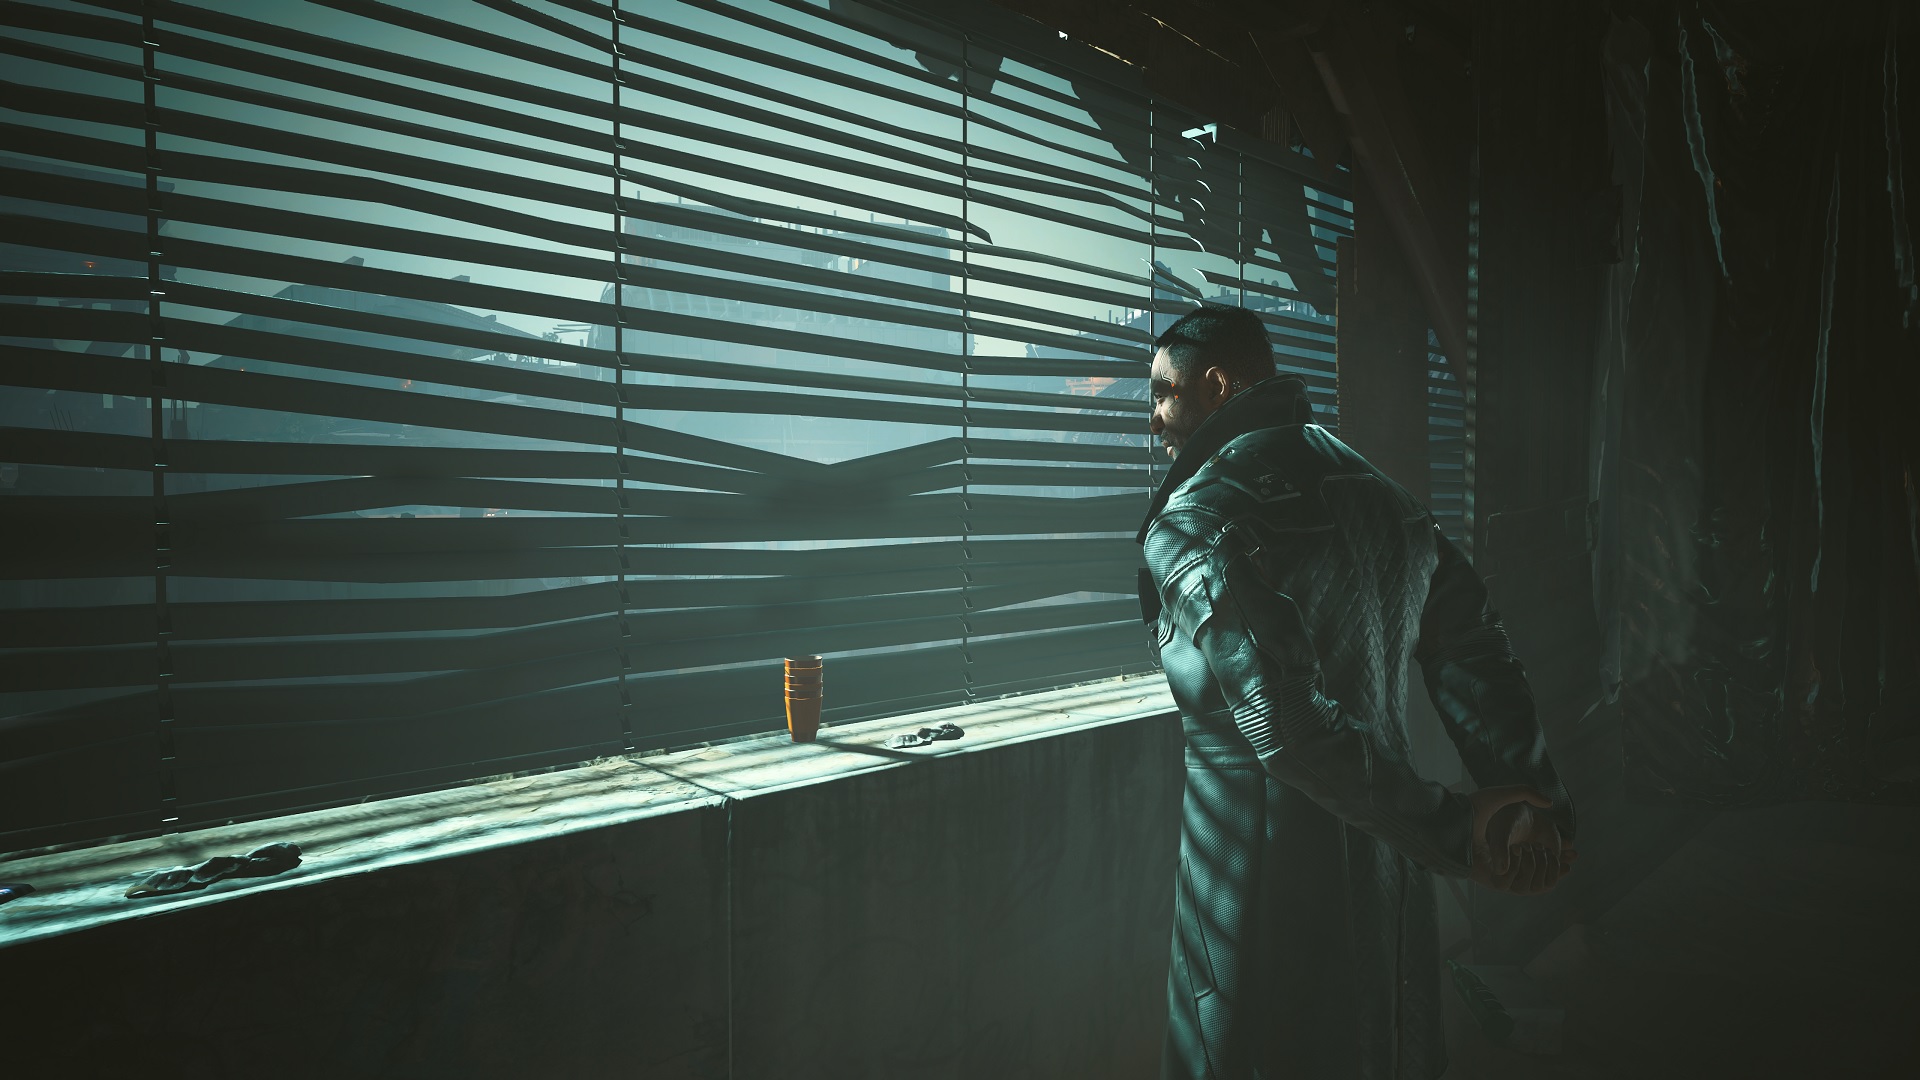 Cyberpunk 2077 is getting an update in December that adds the metro system, new romance interactions, and more